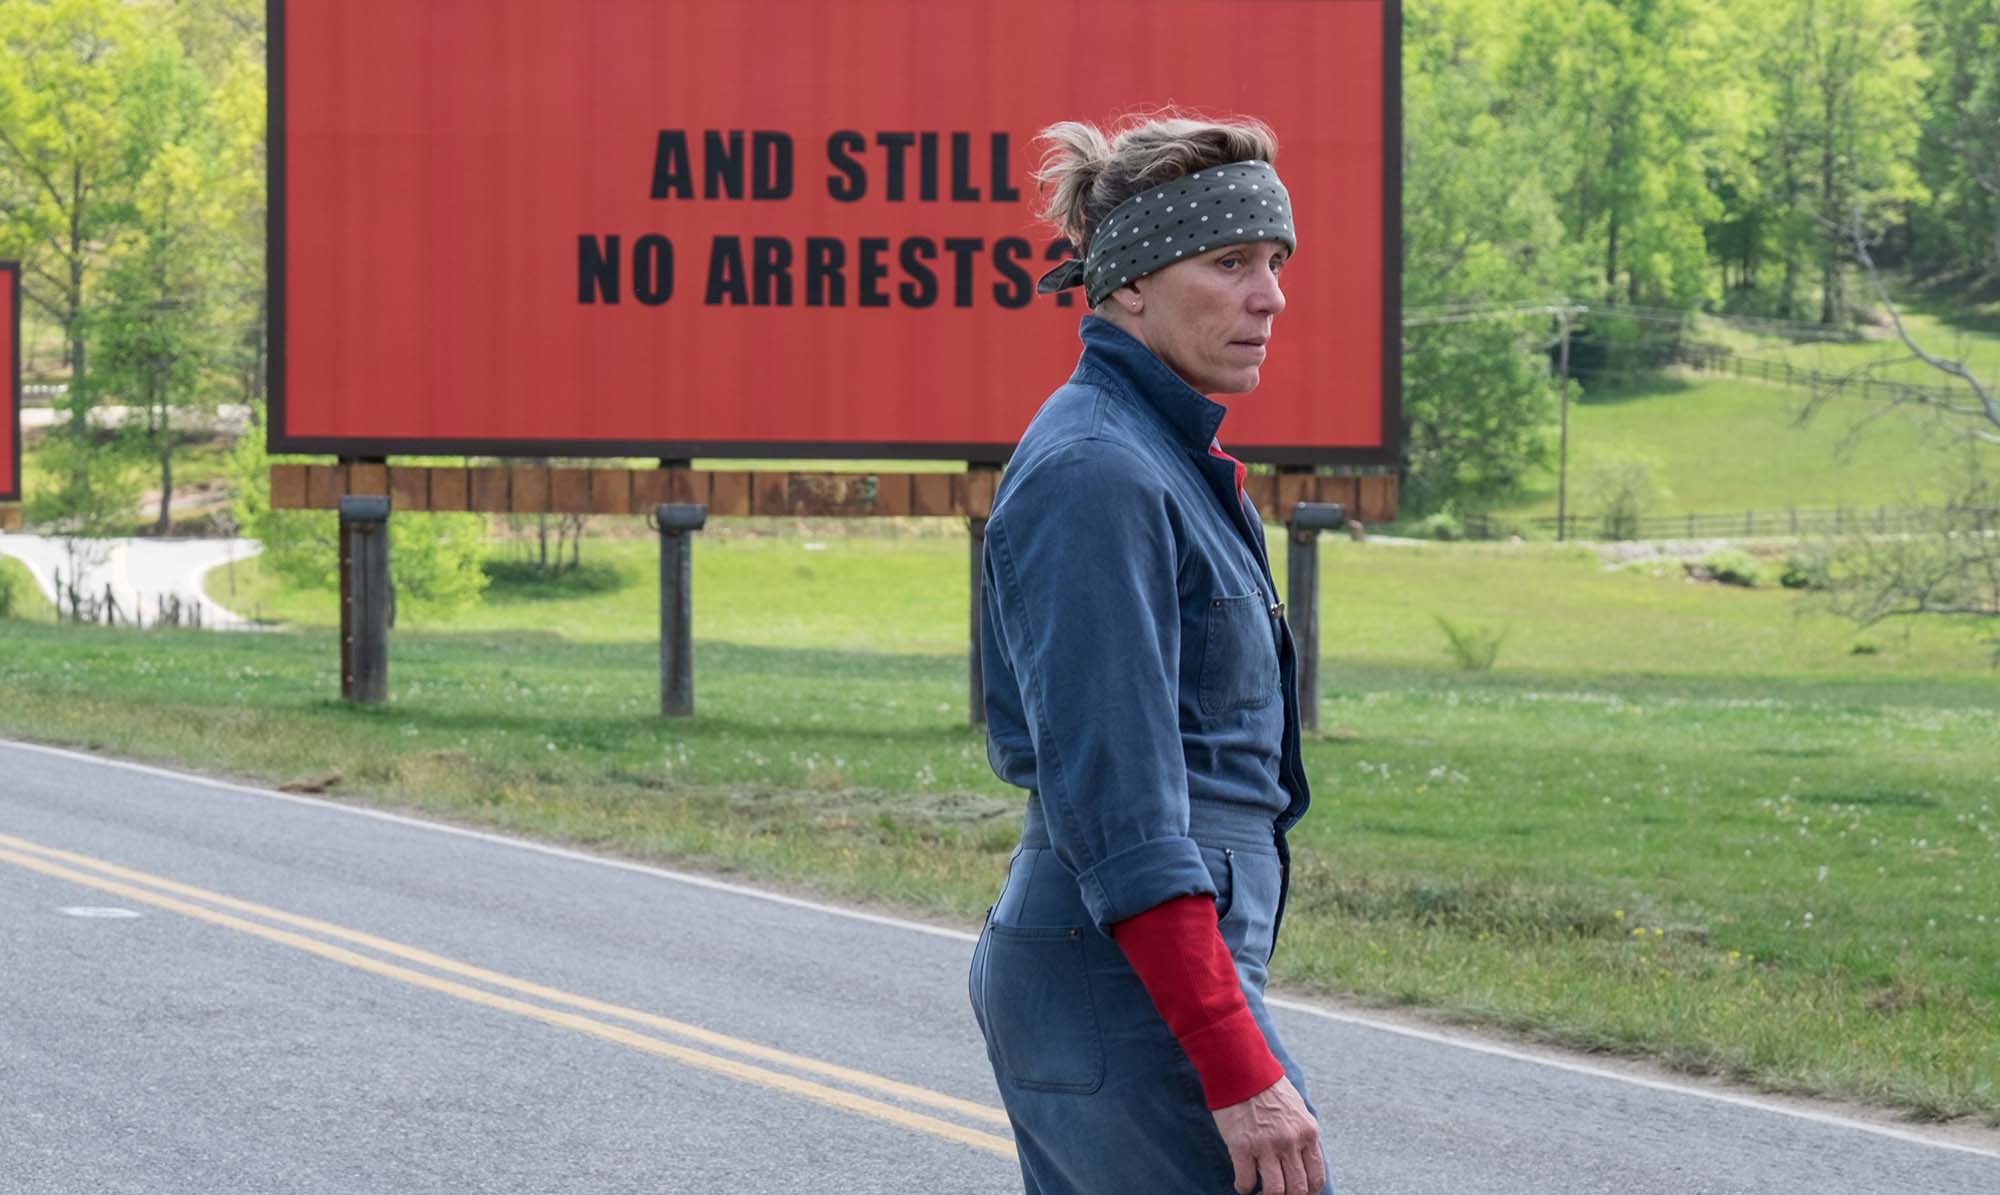 From HBO’s smash-hit series ‘Big Little Lies’ to Martin McDonagh’s darkly comedic drama ‘Three Billboards Outside Ebbing, Missouri’, with Academy Award-winner Frances McDormand in the lead, these are the winners and losers of the 2018 Golden Globes.